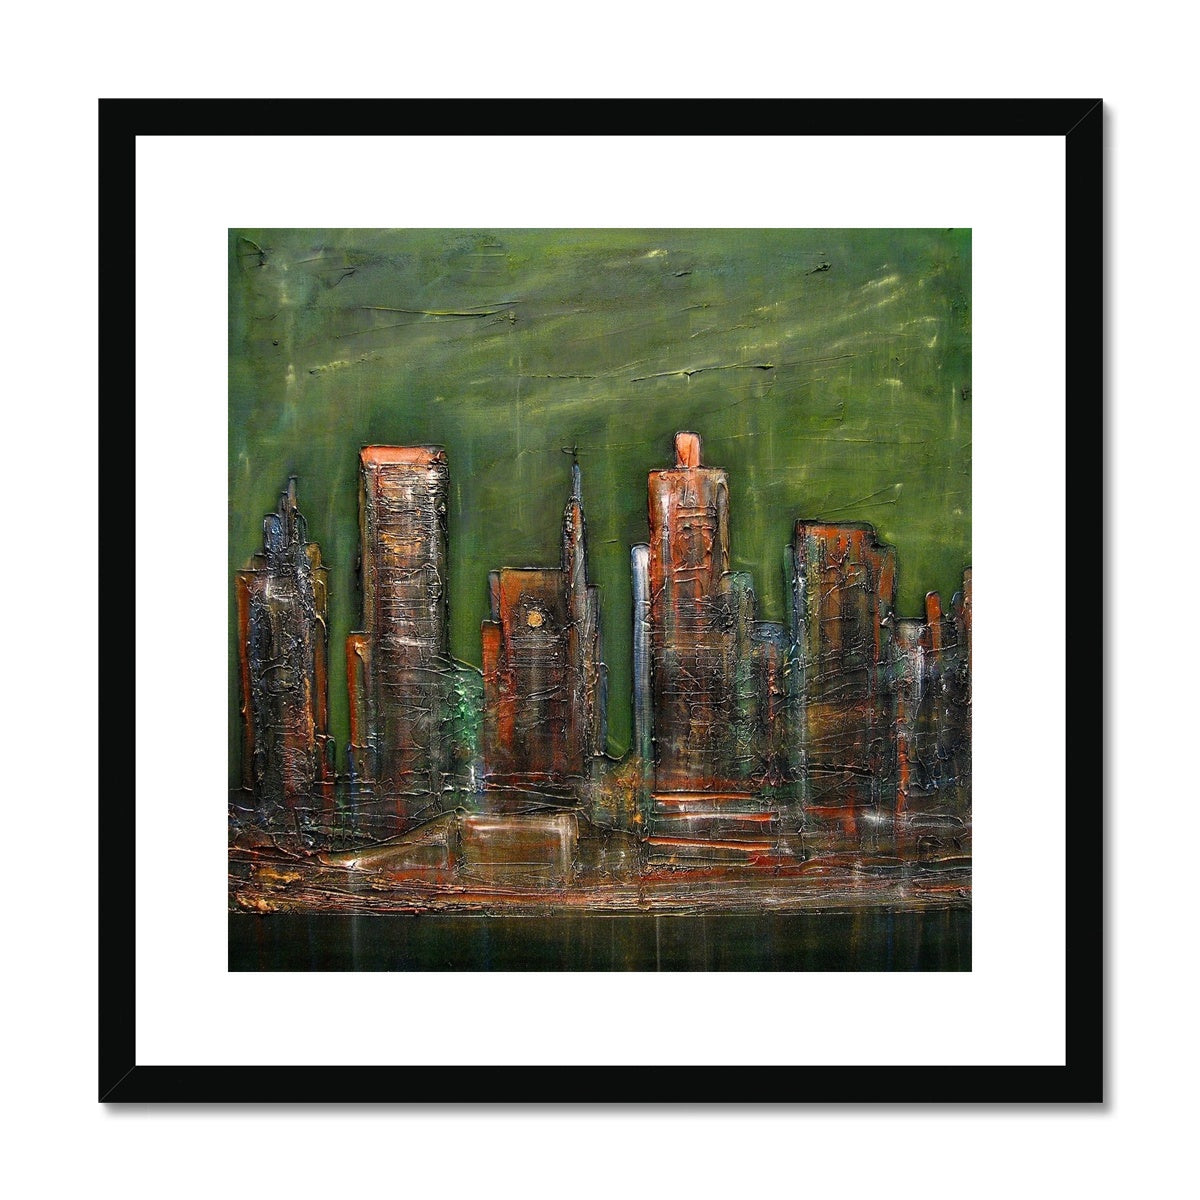 A Neon New York Painting | Framed & Mounted Prints From Scotland-Framed & Mounted Prints-World Art Gallery-20"x20"-Black Frame-Paintings, Prints, Homeware, Art Gifts From Scotland By Scottish Artist Kevin Hunter